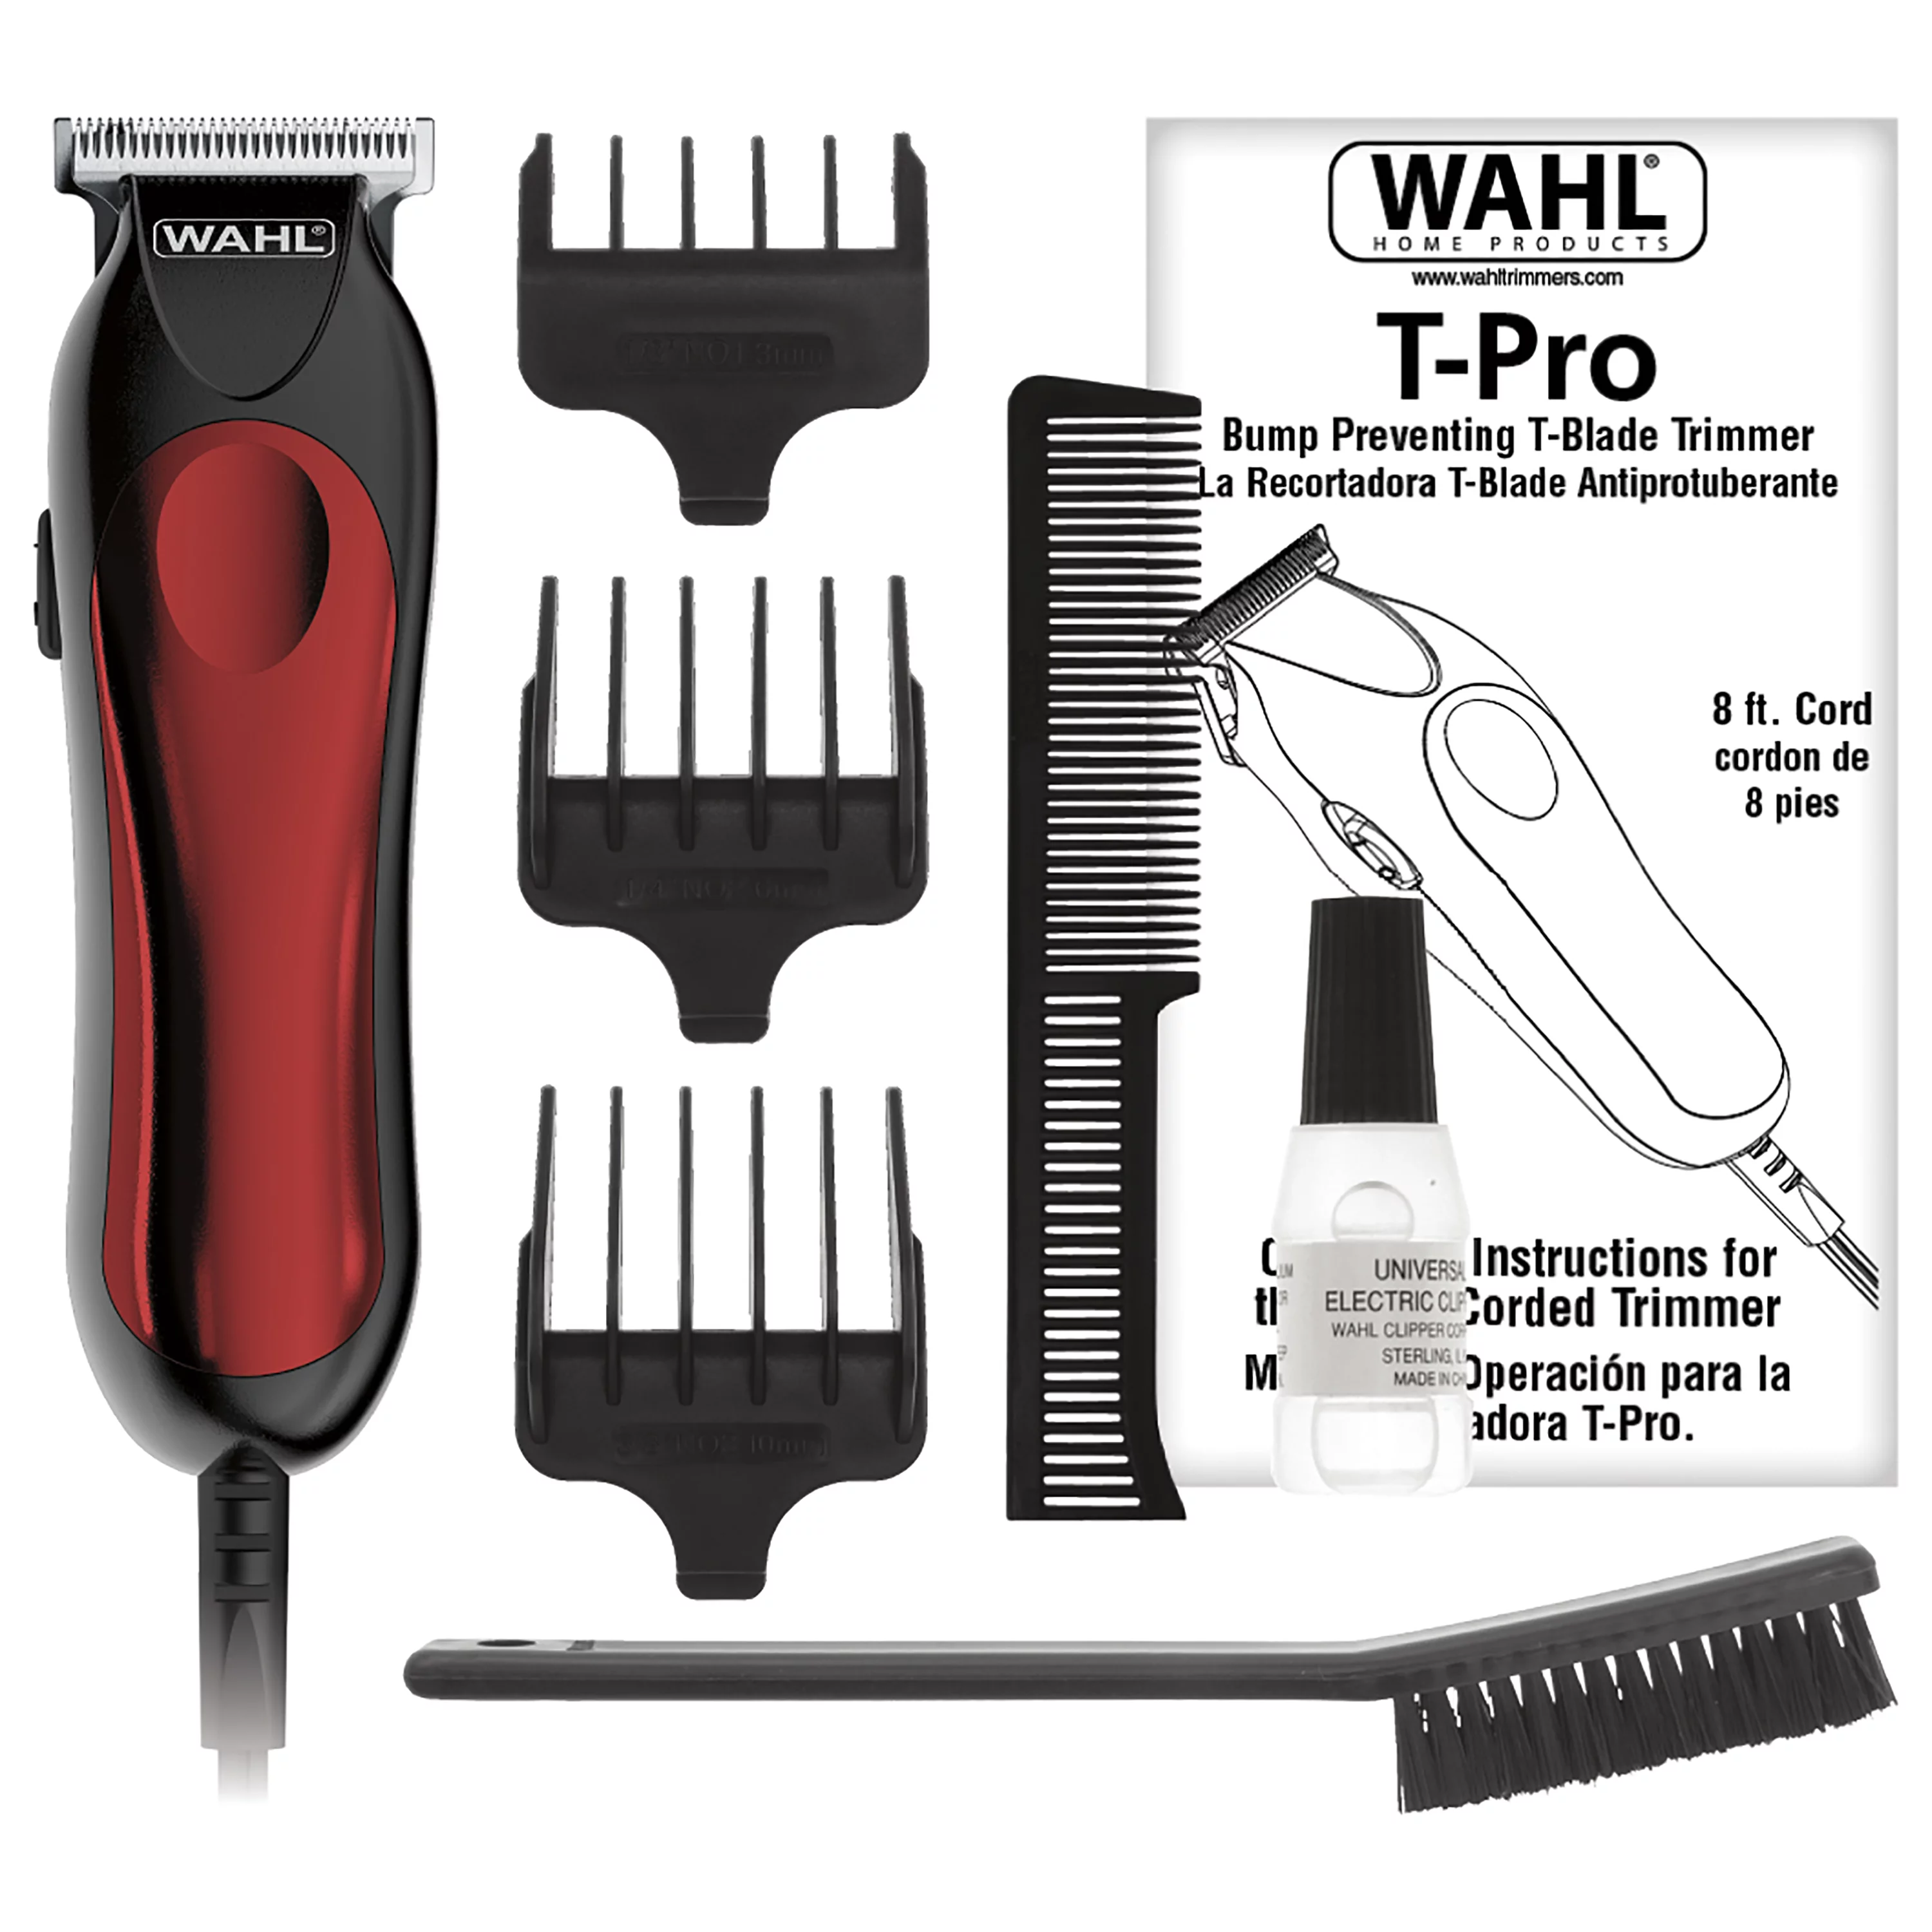 WAHL CLIPPER T-Pro Corded Trimmer - Trim, detail, fade, outline and shave with this versatile trimmer - Model 9307-300, Red/Black